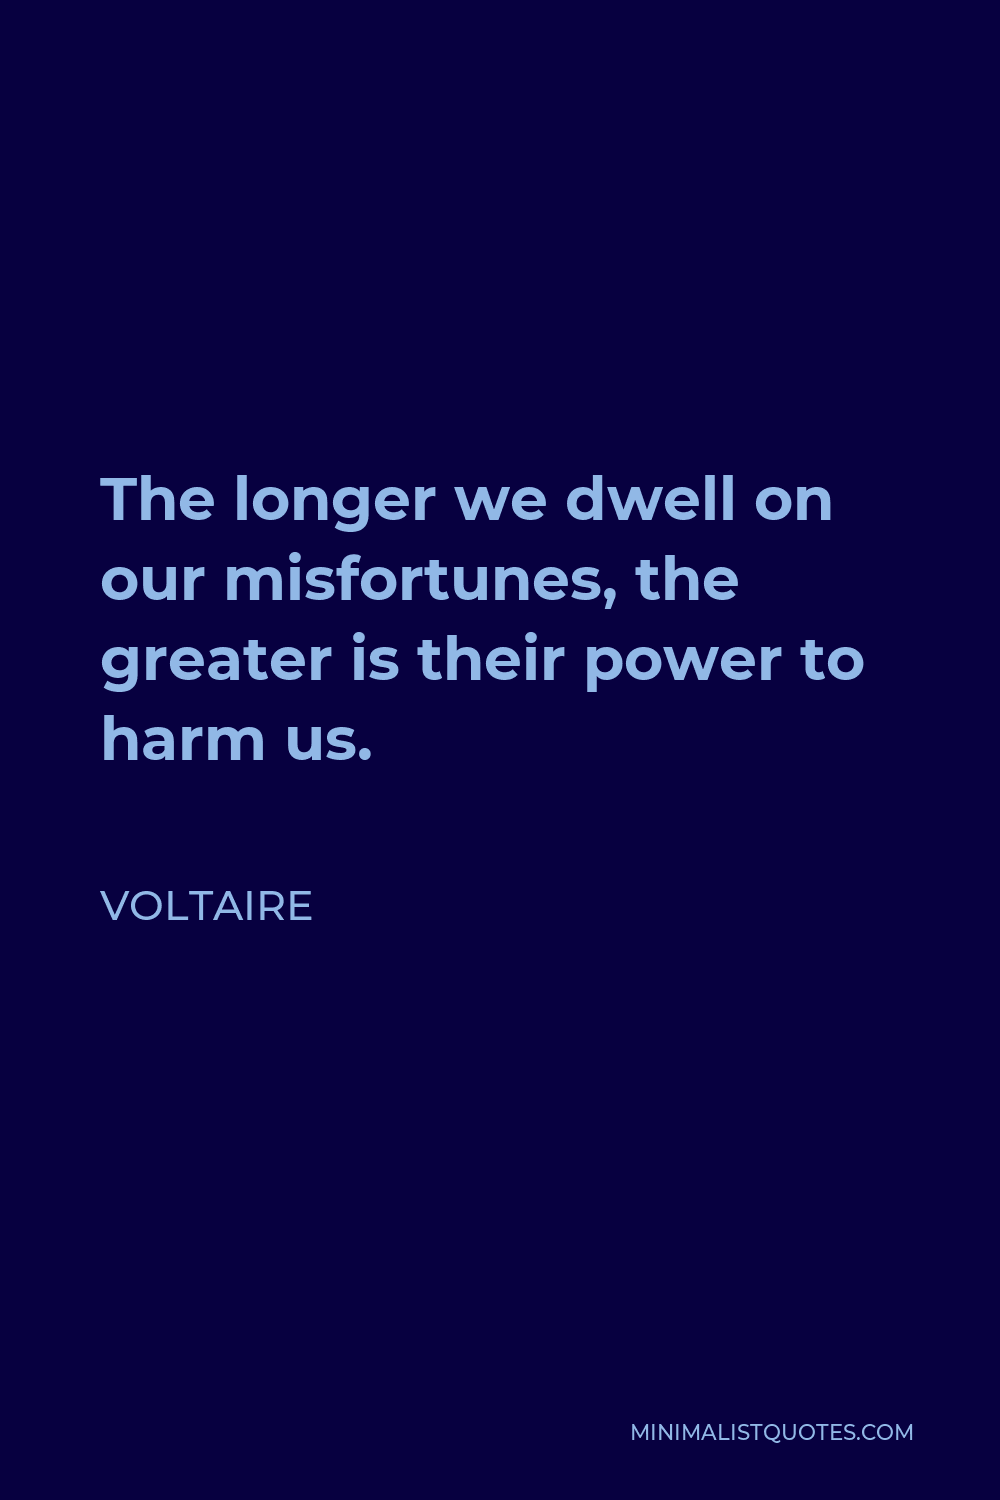 Voltaire Quote - The longer we dwell on our misfortunes, the greater is their power to harm us.